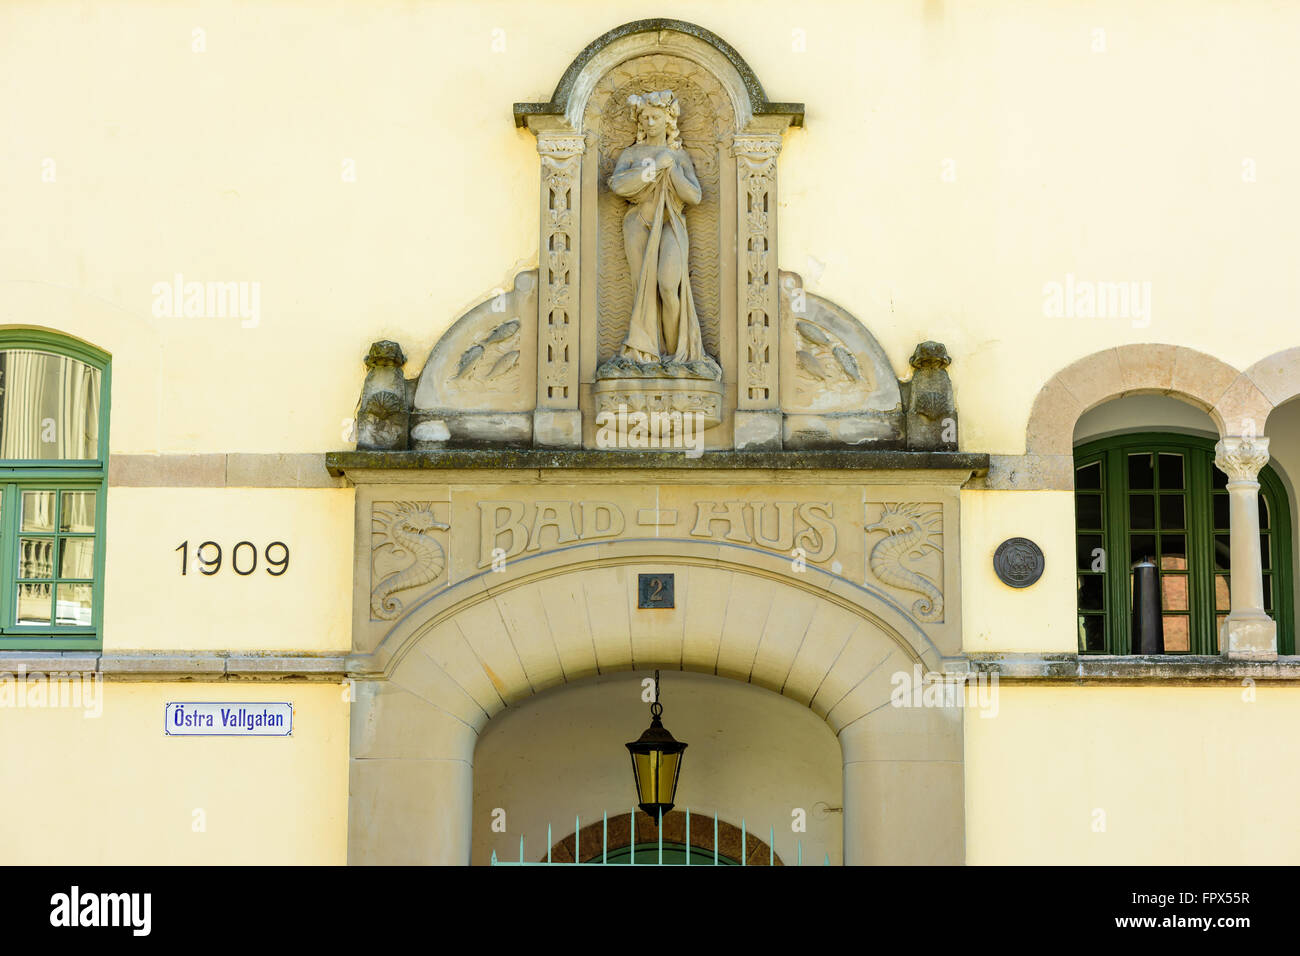 Kalmar, Sweden - March 17, 2016: The portal above the old bathhouse from 1909 is called “Susanna in the bath”. It is carved in s Stock Photo